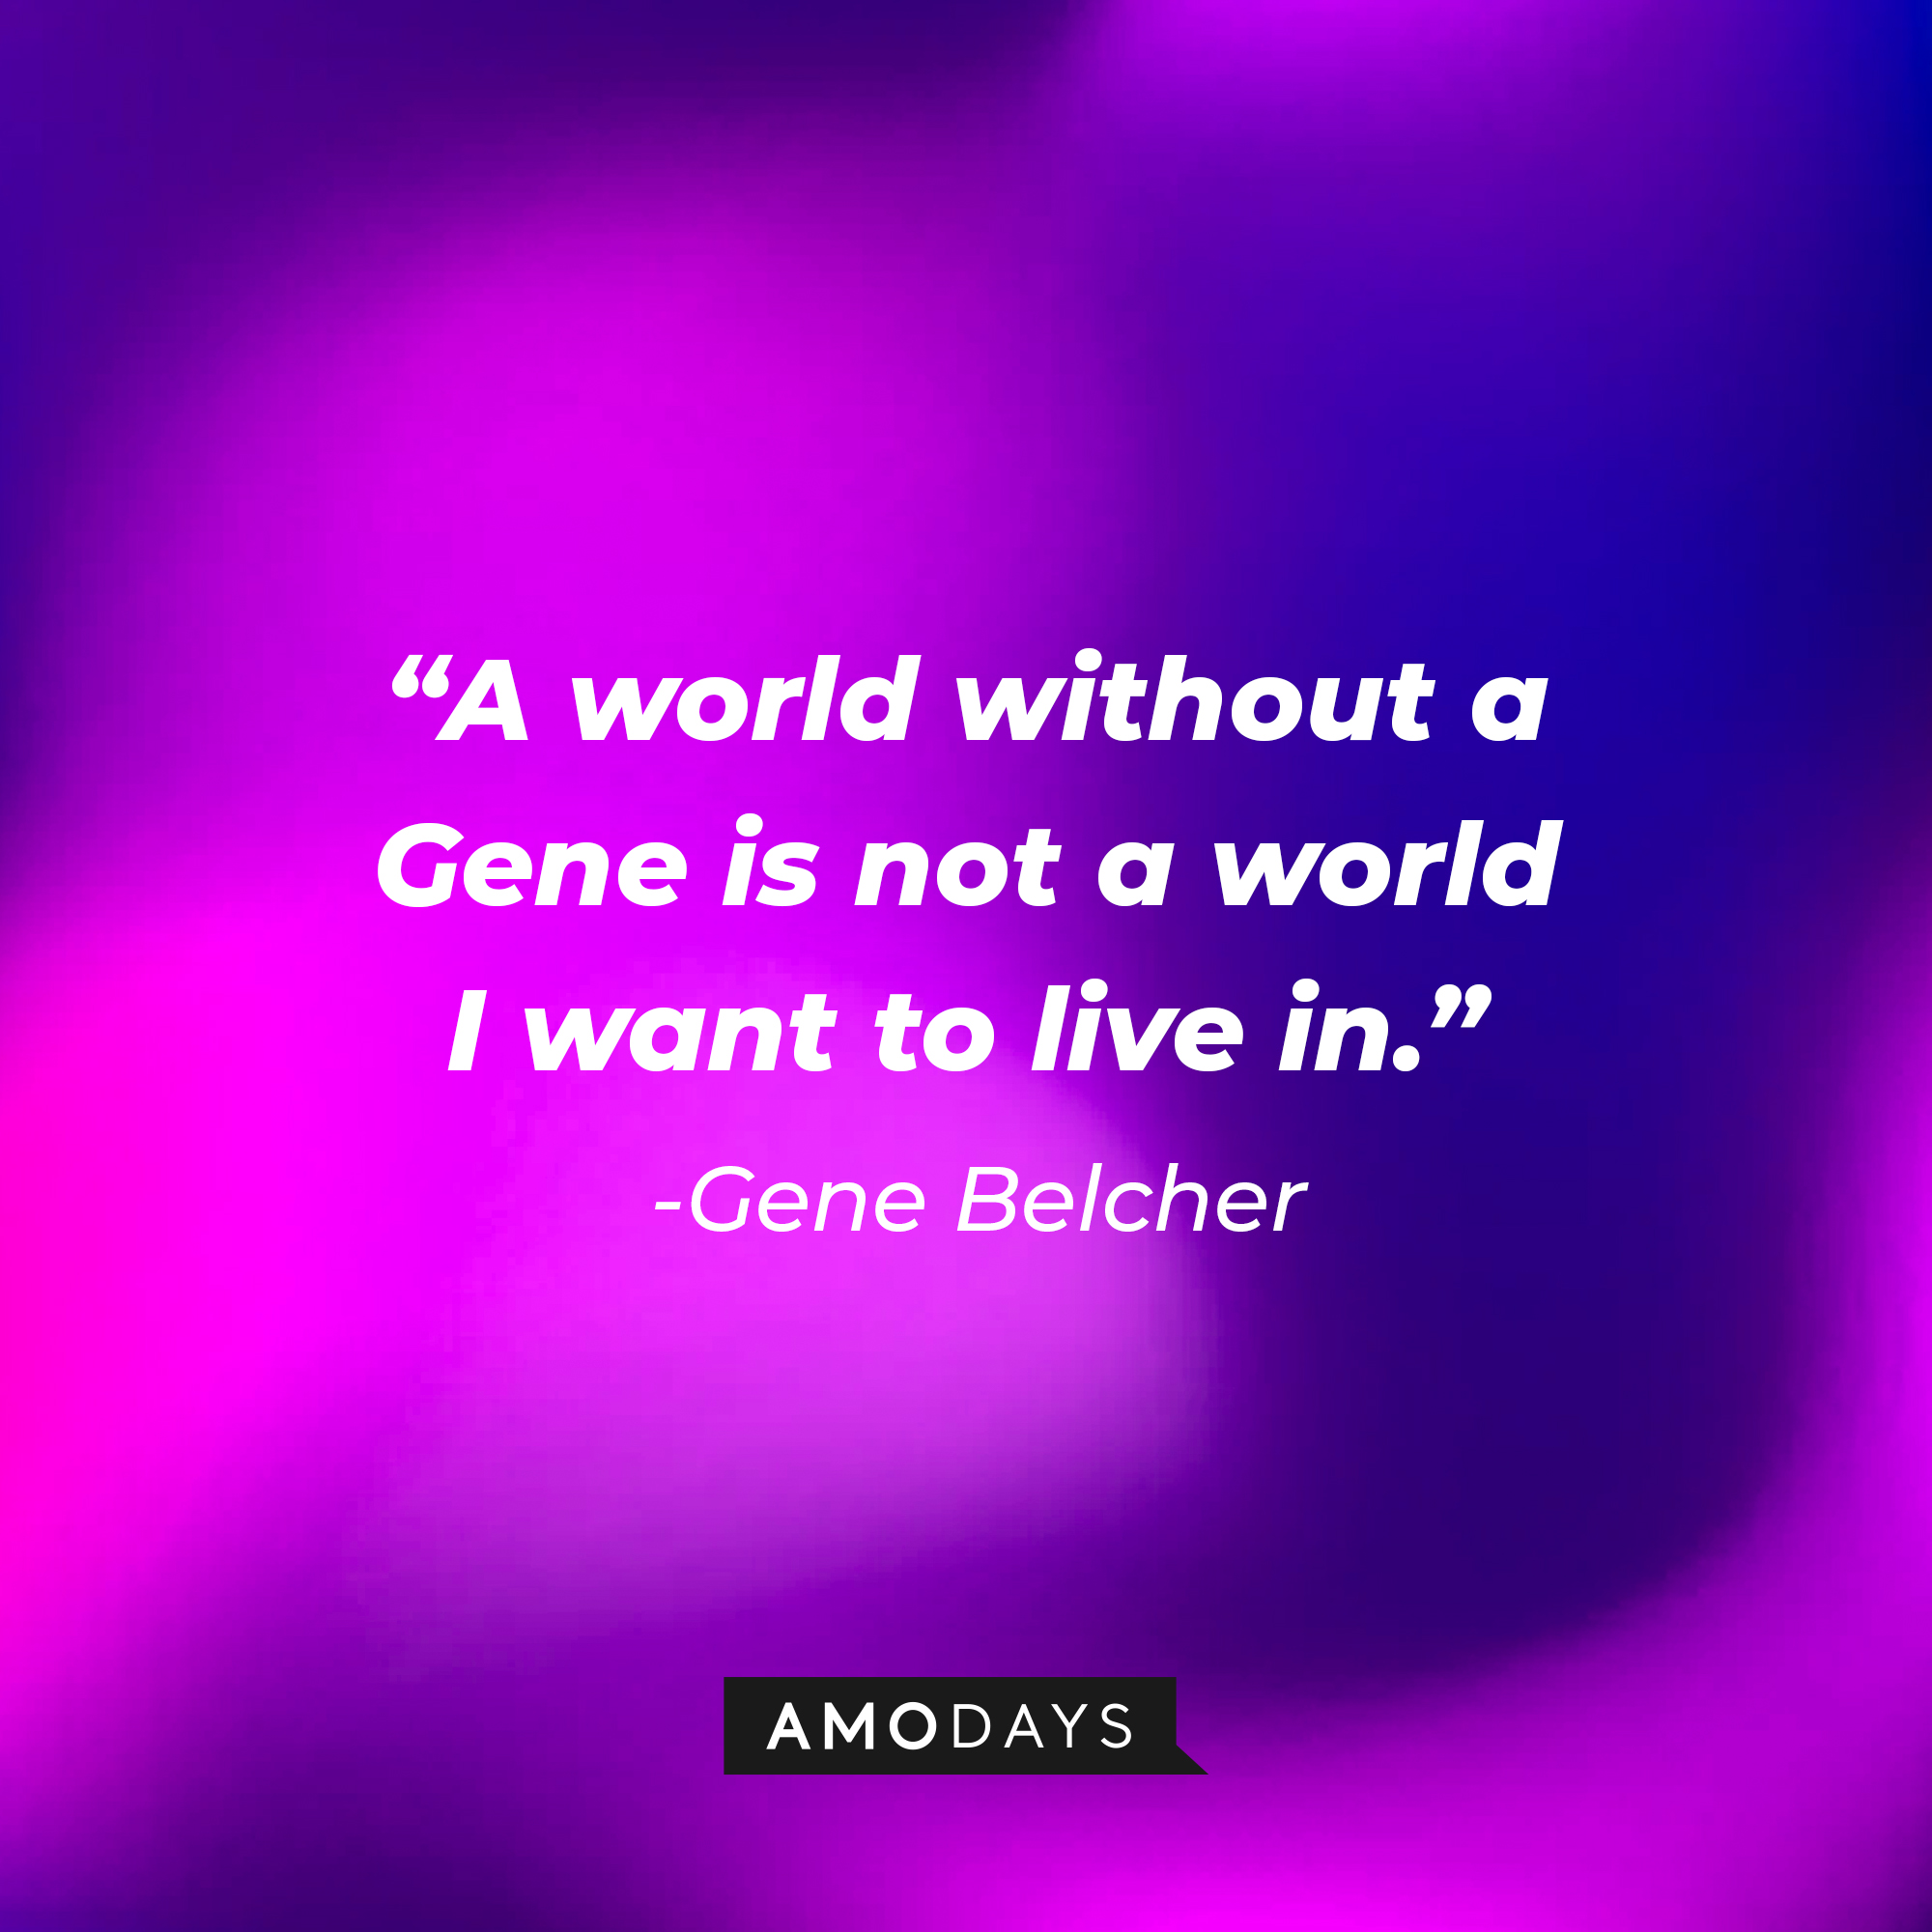 Gene Belcher's quote: "A world without a Gene is not a world I want to live in." | Source: Amodays